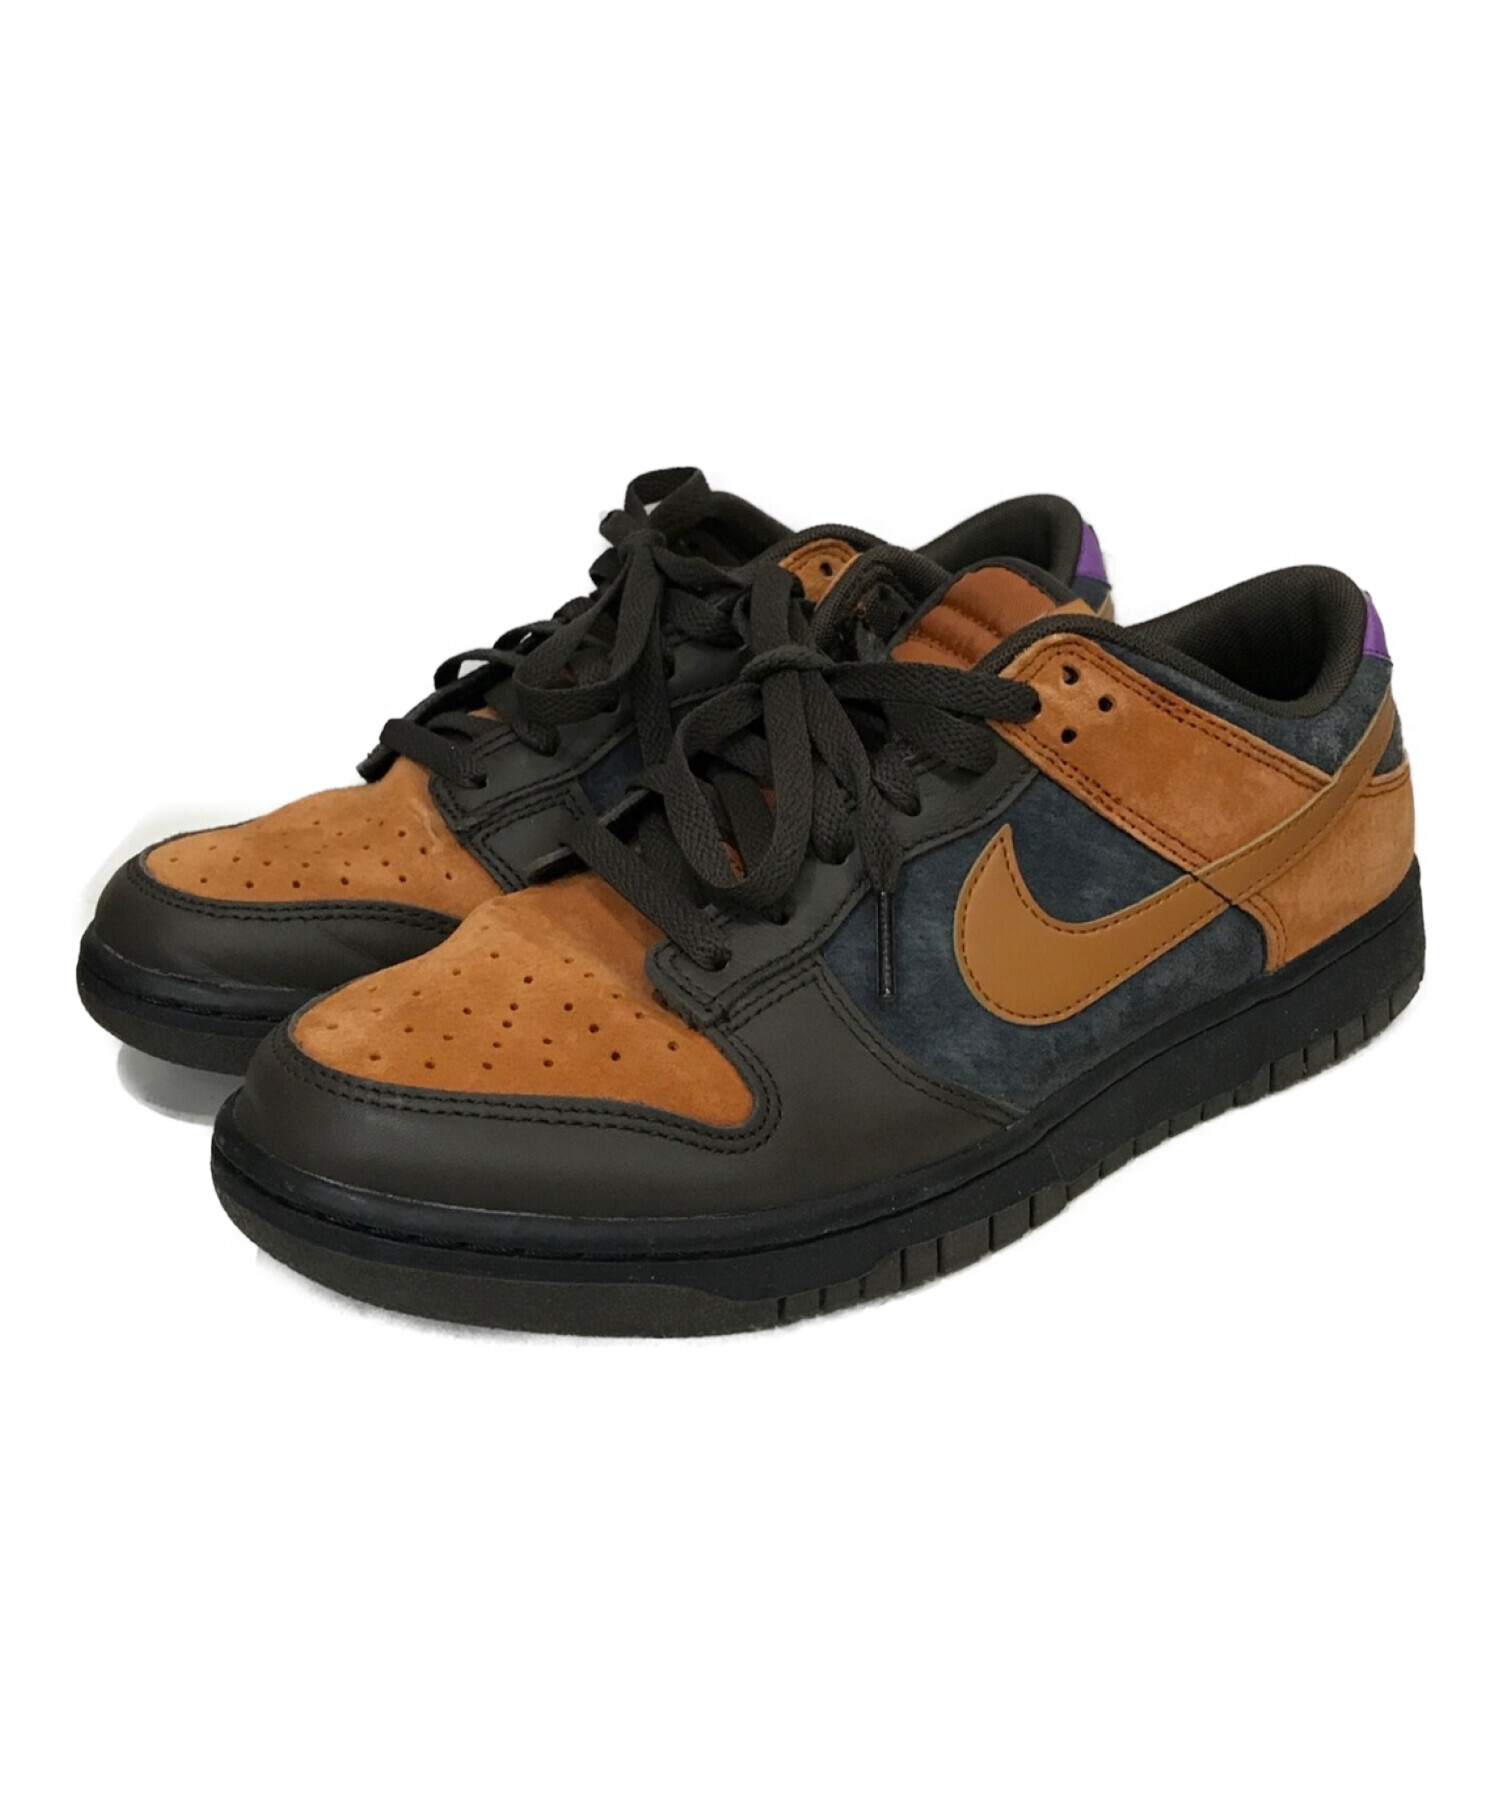 Nike ダンク low  Cider 27